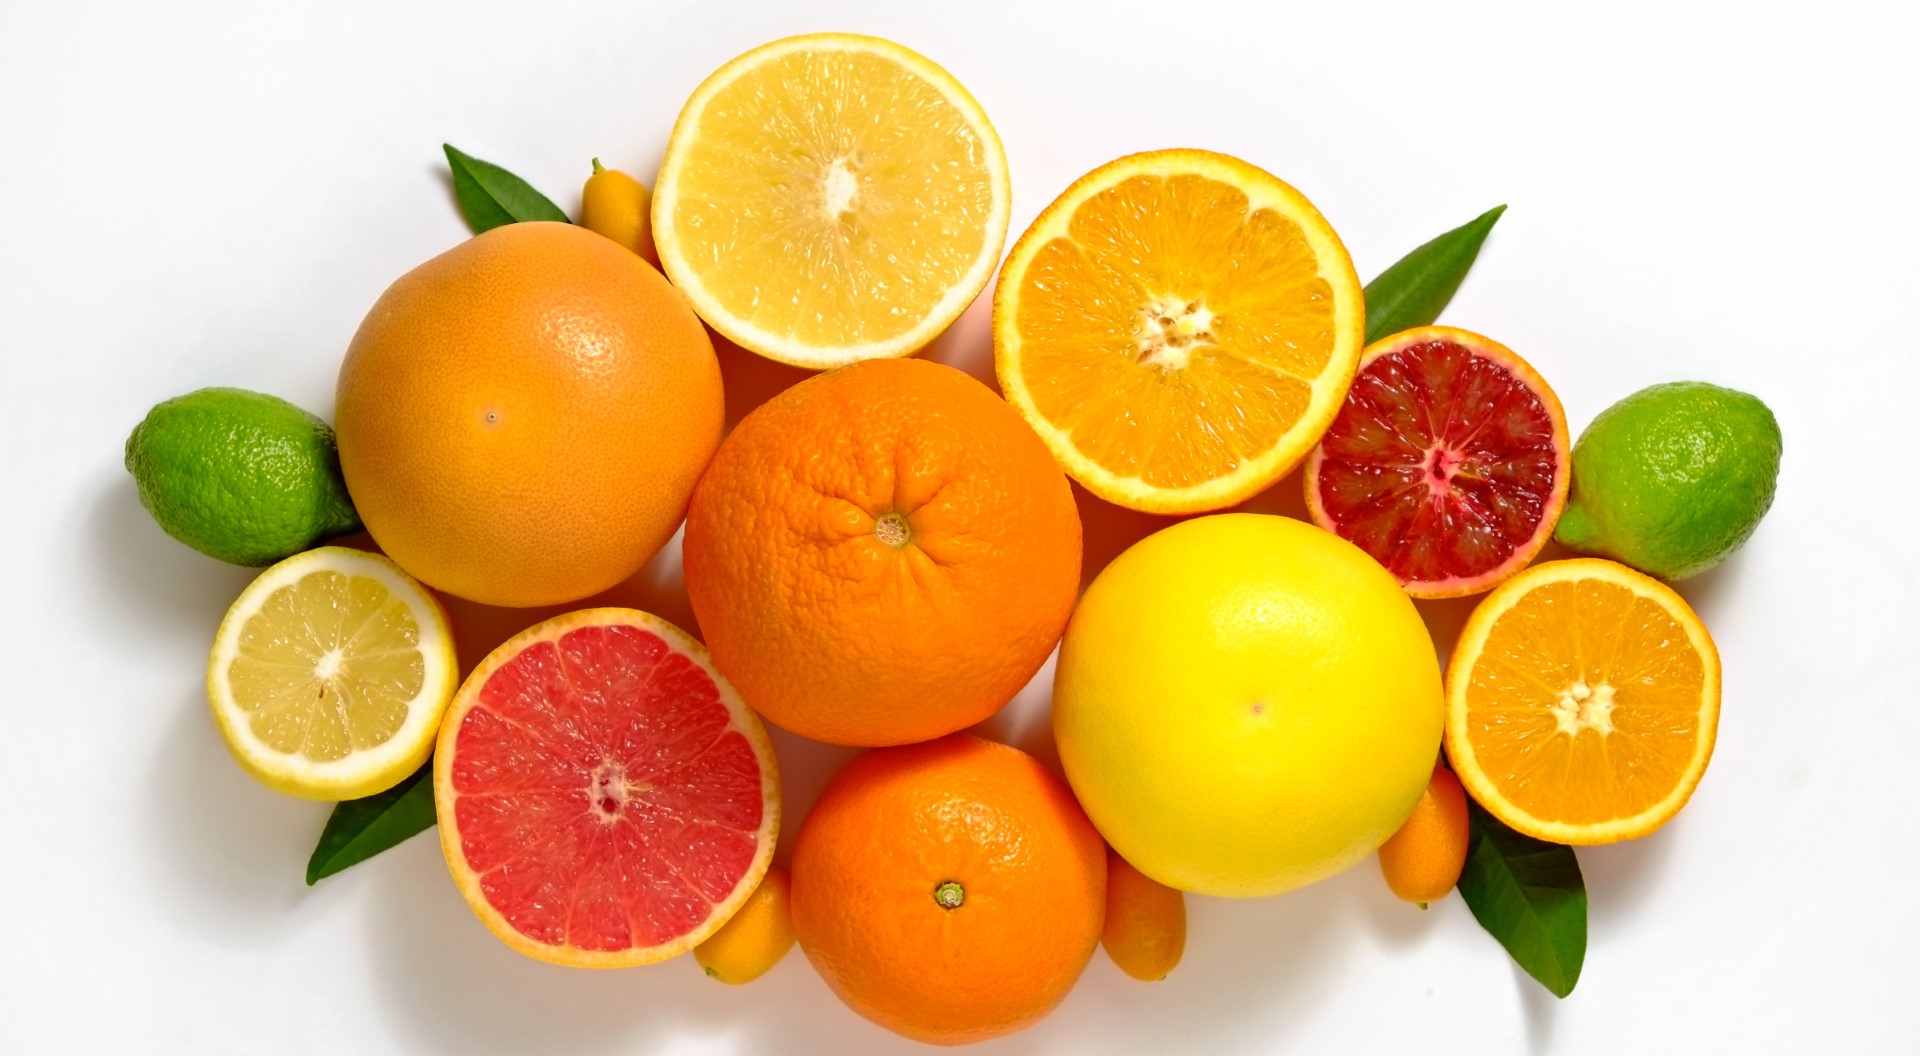 Collection of citrus fruits